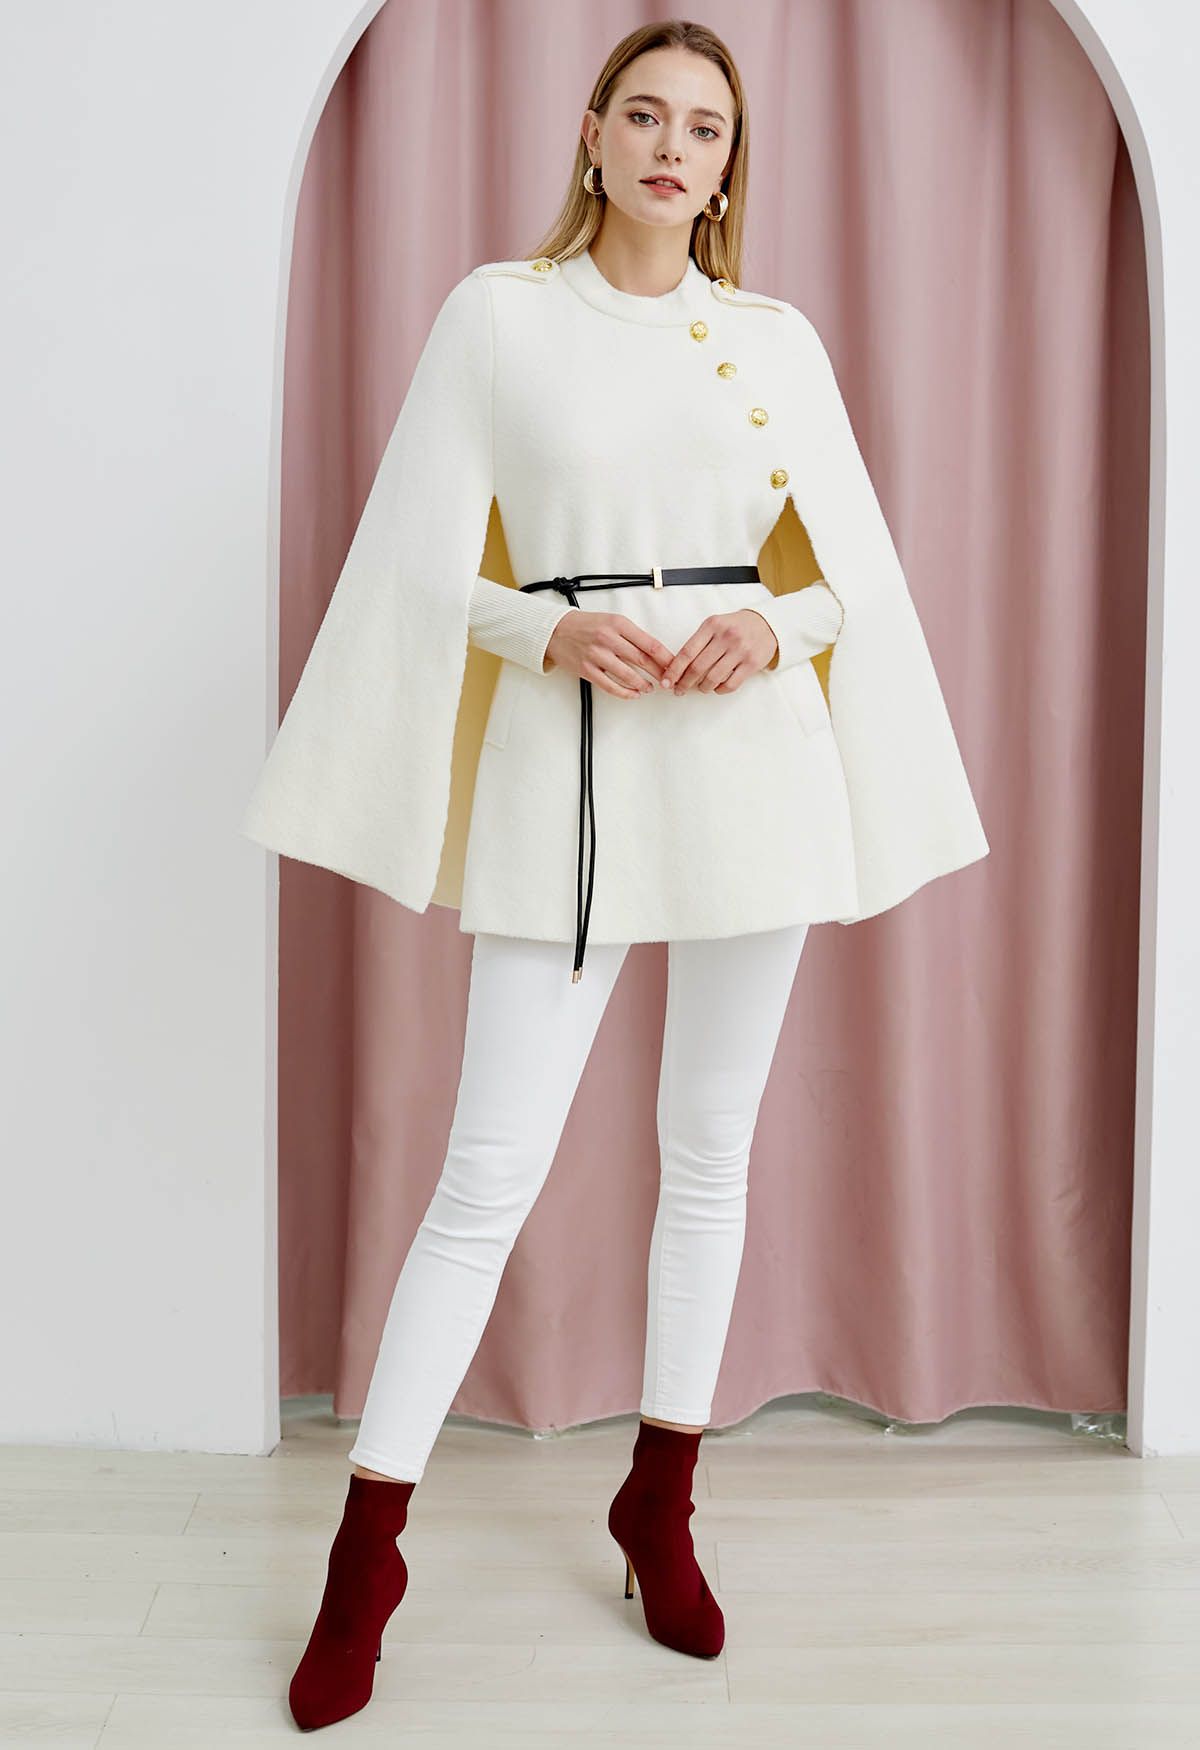 Golden Button Belted Cape Coat in Ivory